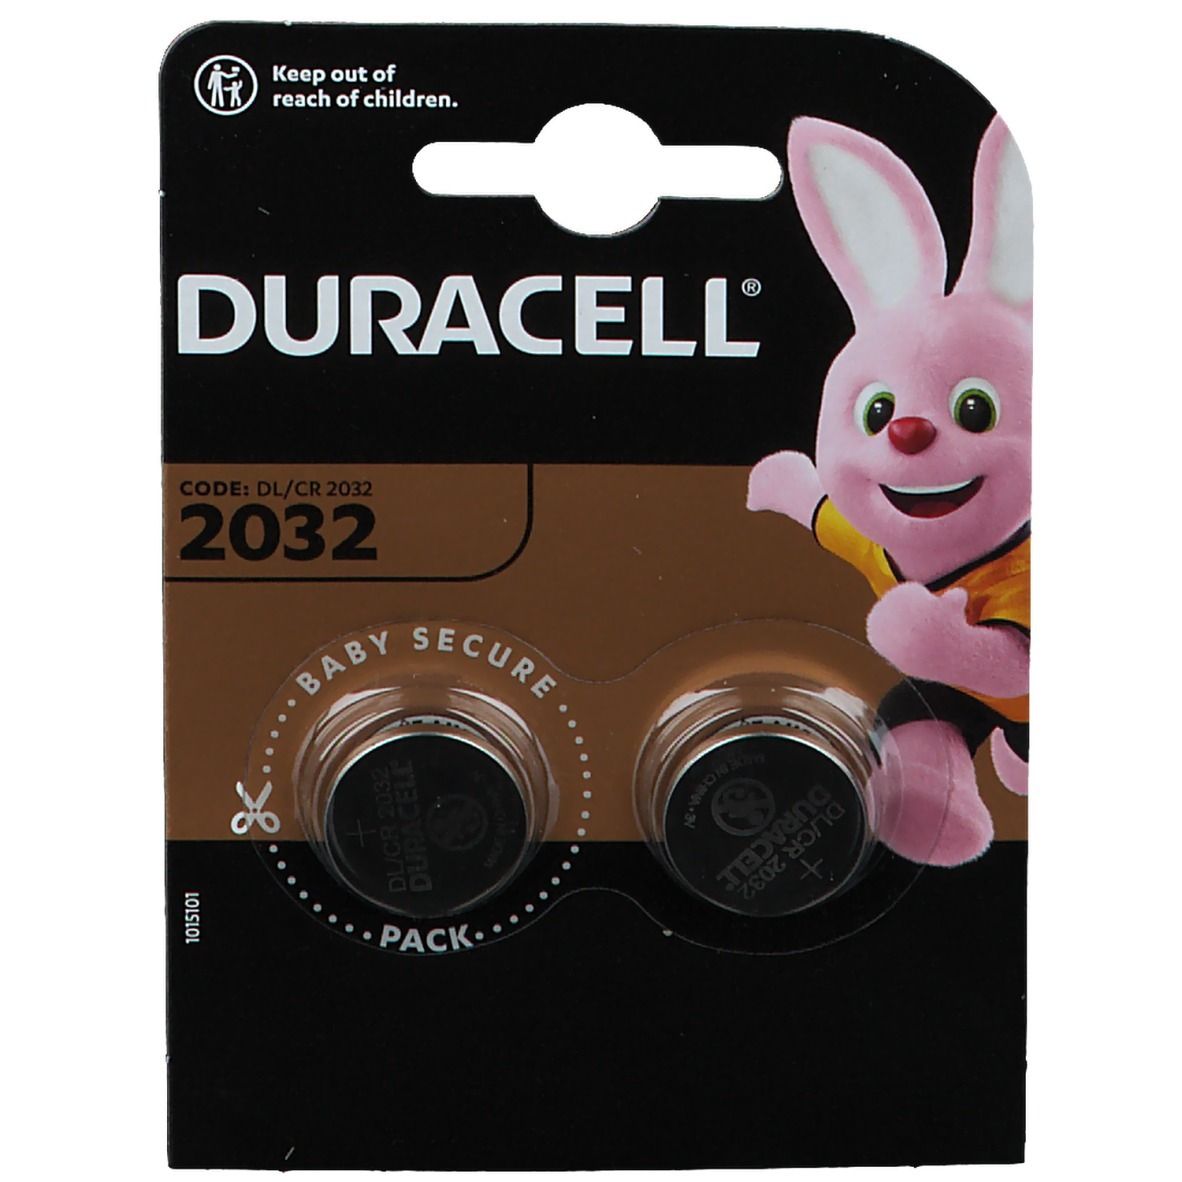 DURACELL® Lithium Knopfzelle 2032